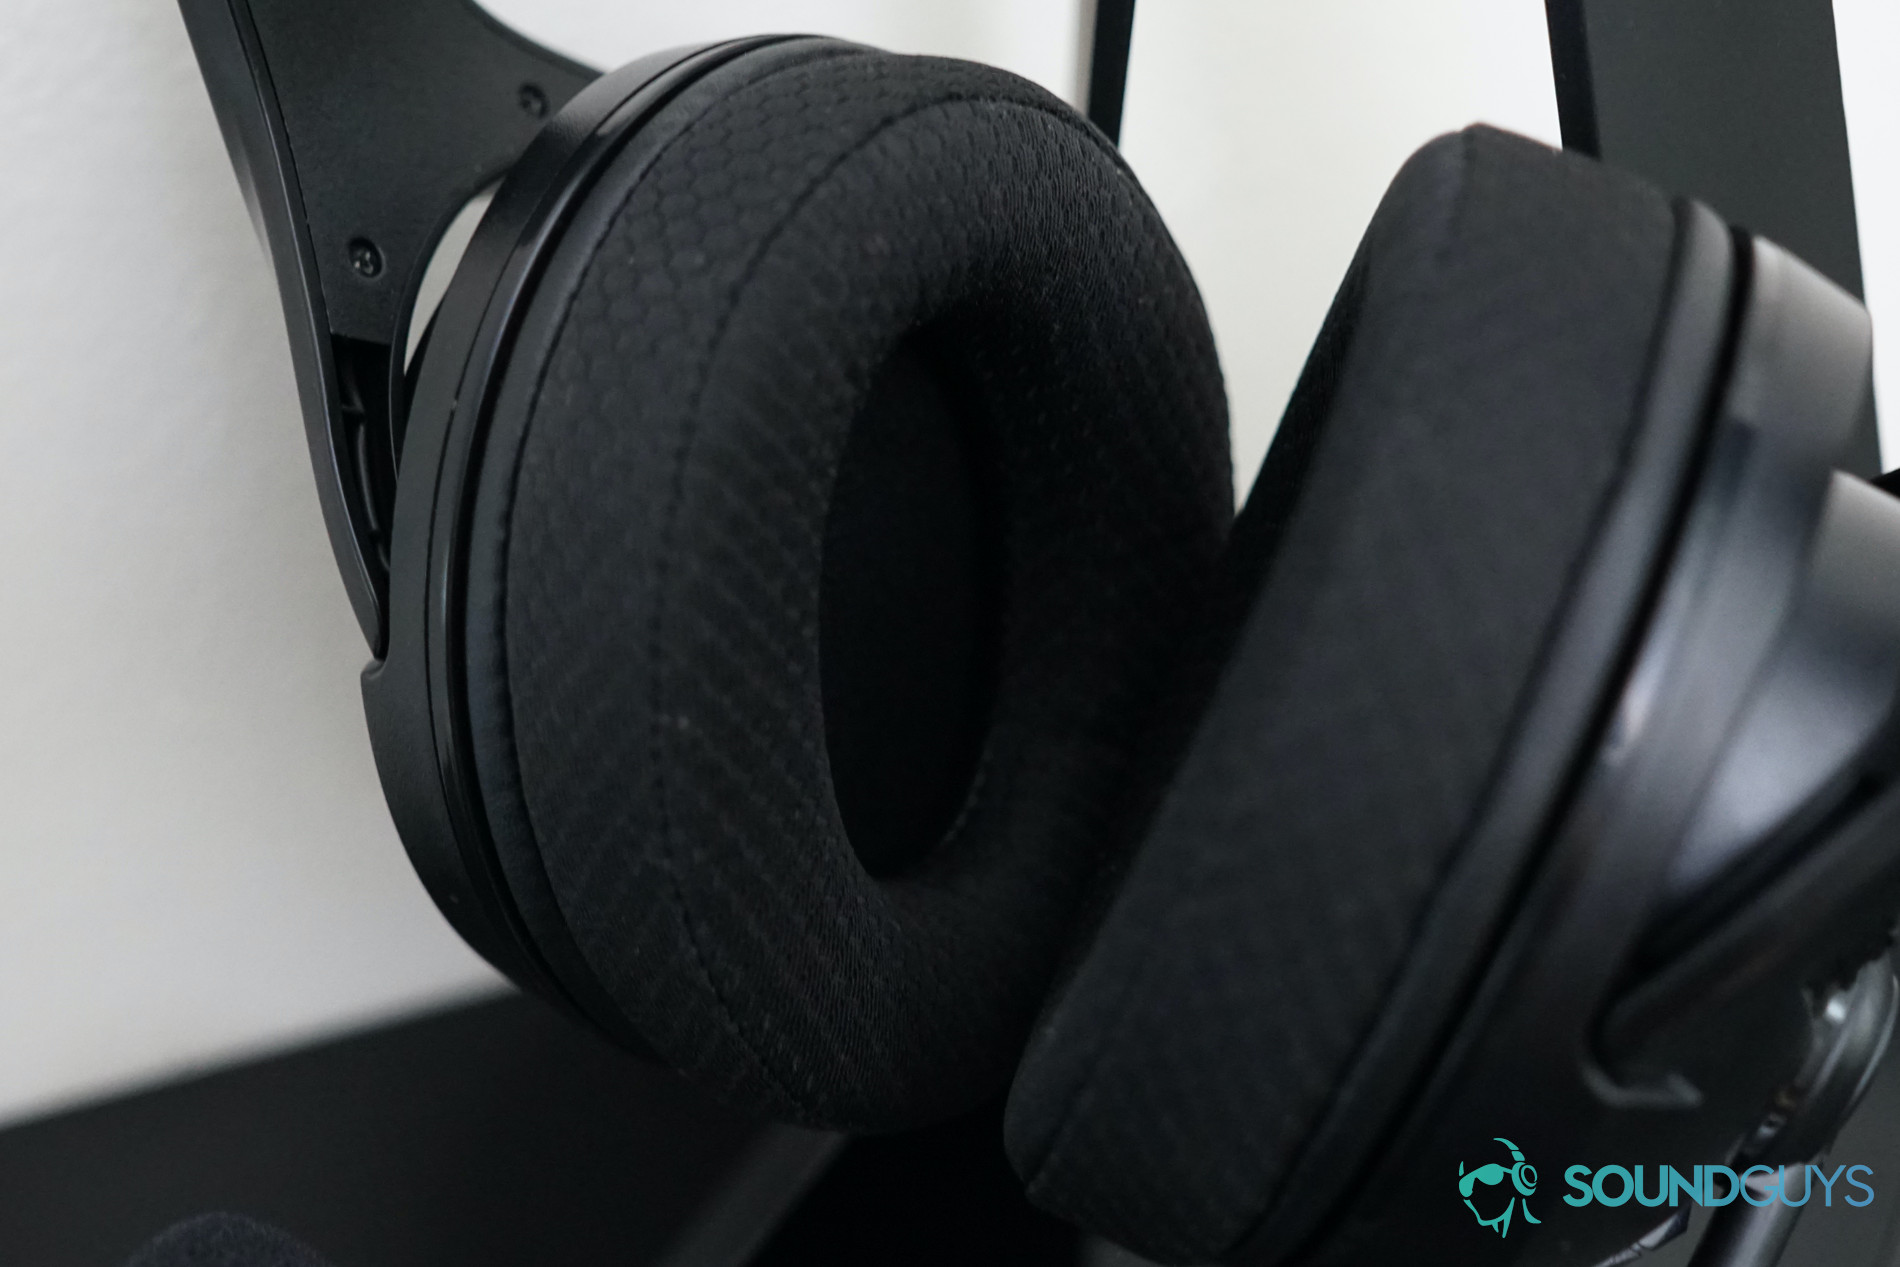 A close-up photo of the fabric earpads of the AmazonBasics Gaming Headset on a stand.